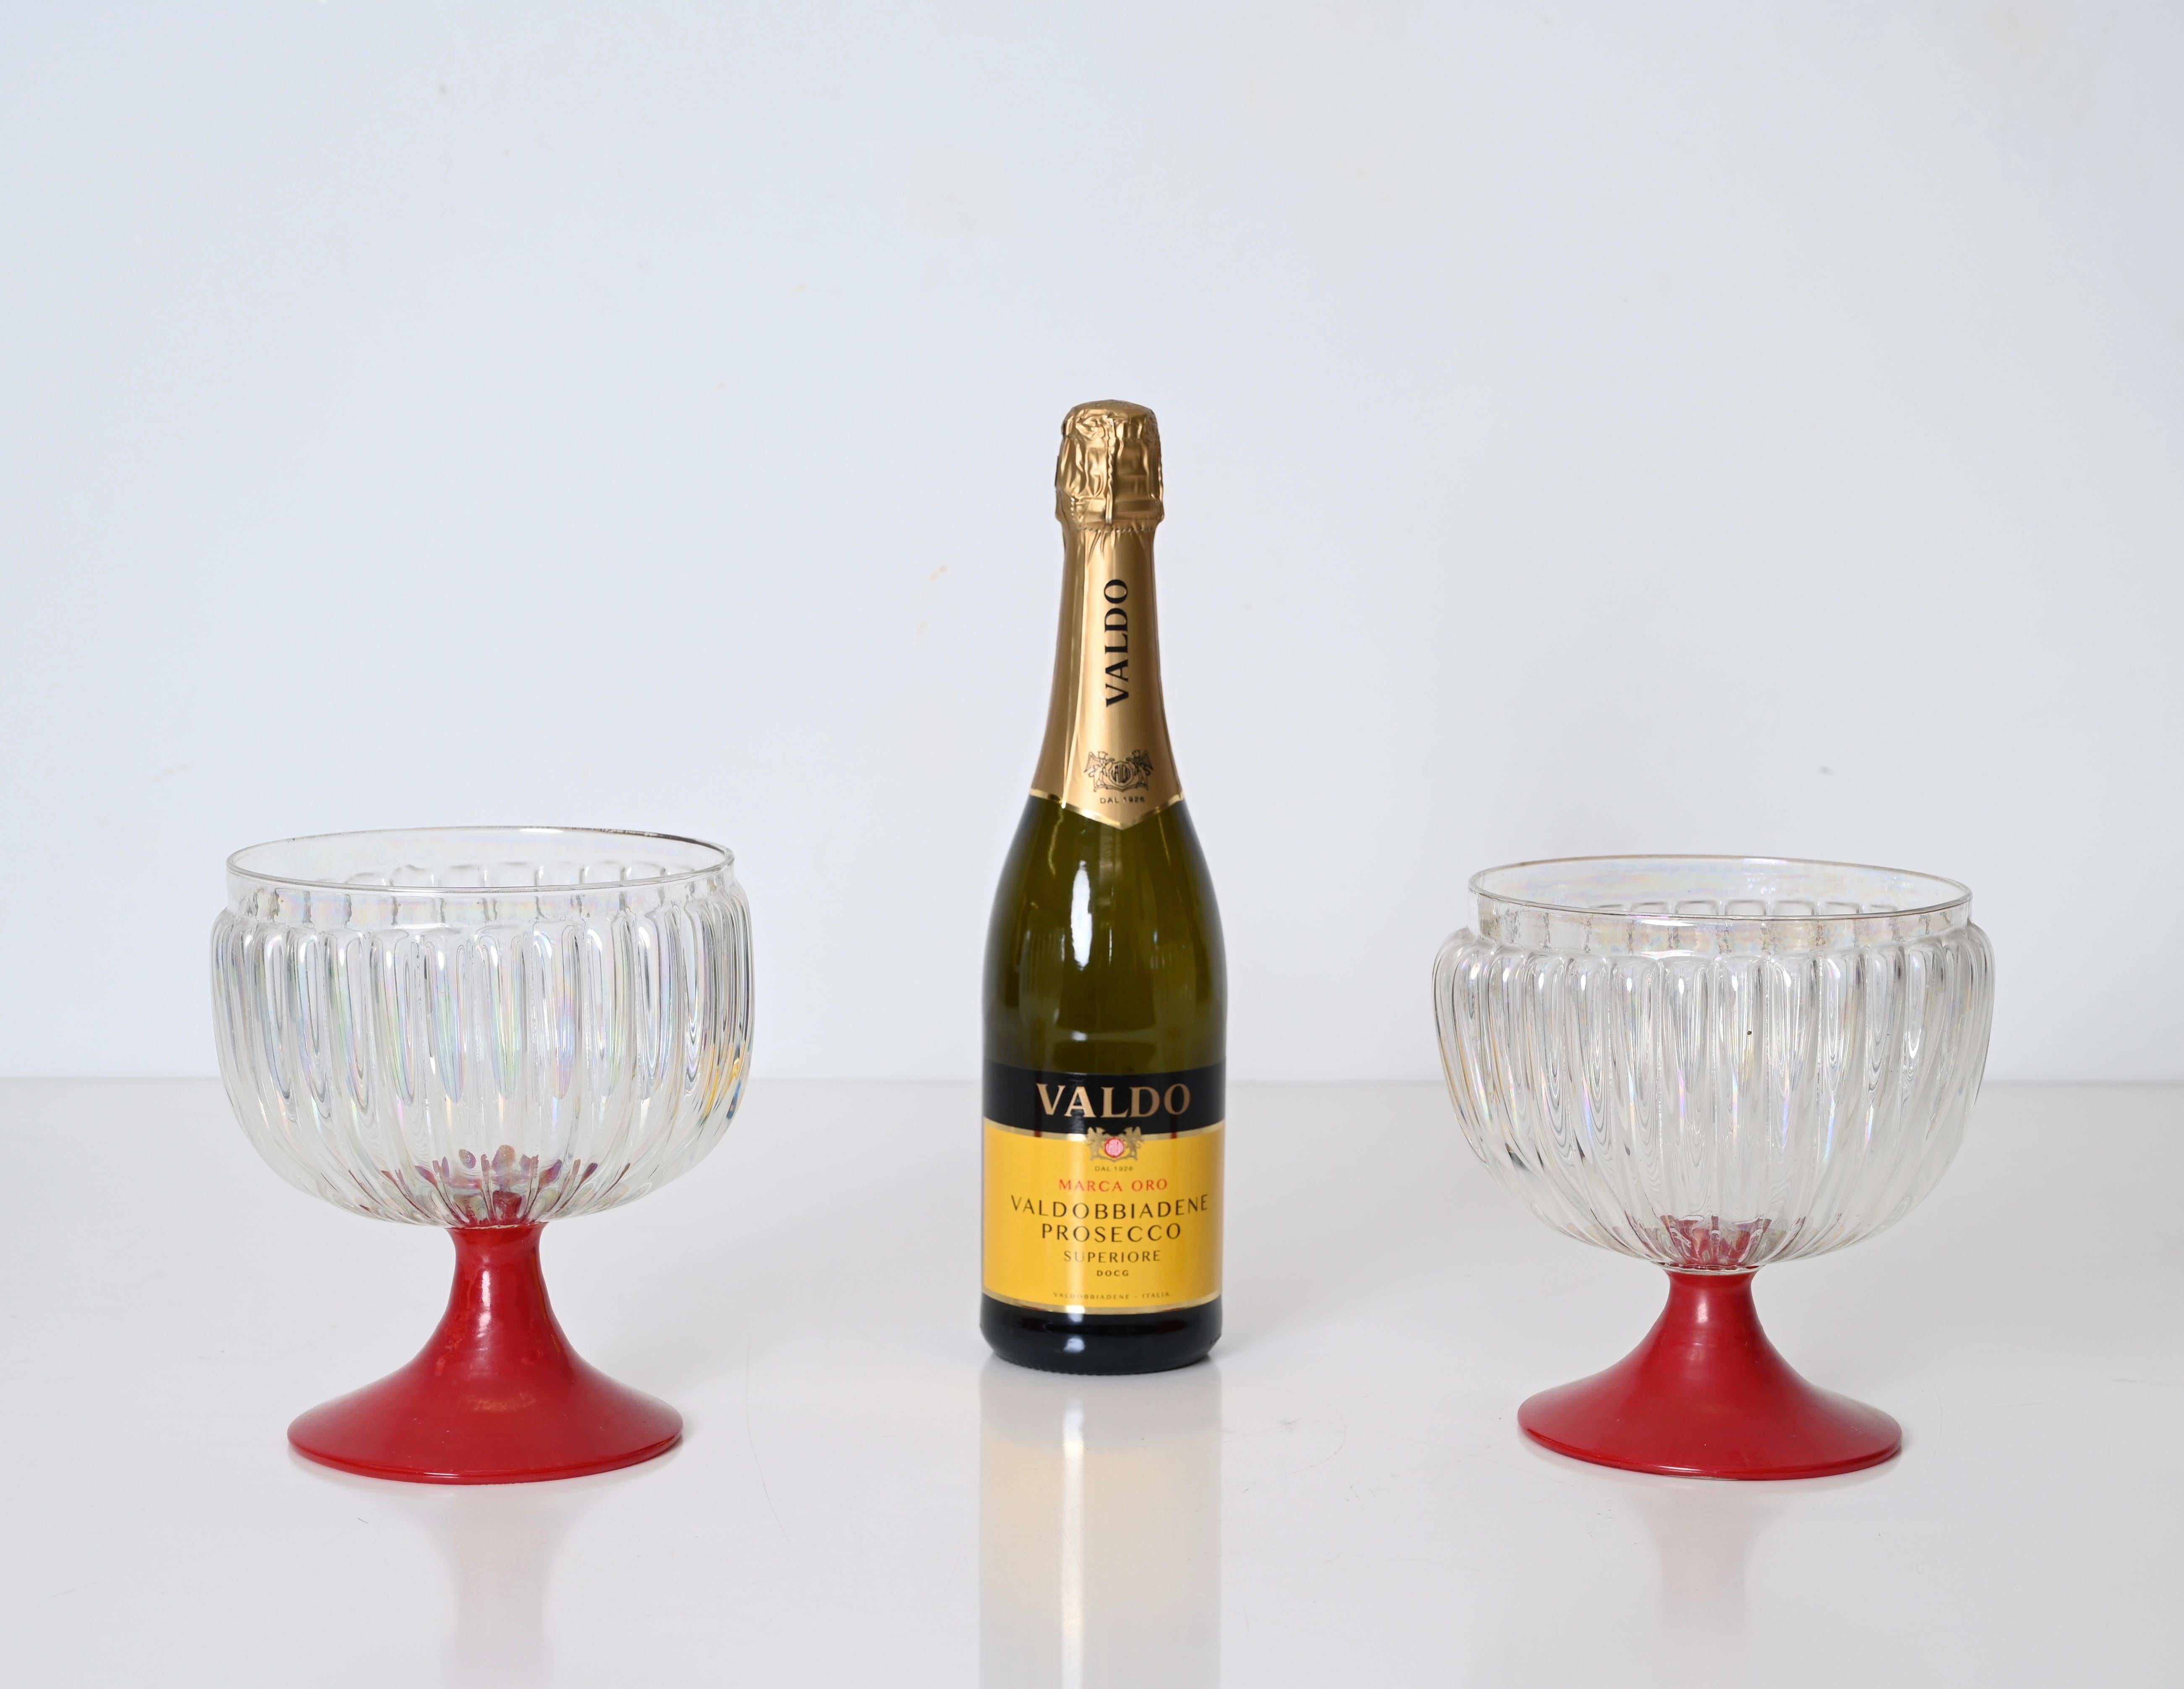 Amazing pair of large decorative Murano glasses. These stunning glasses were hand-made in Italy, Murano in the 1940s. 

The quality of these decorative goblet glasses is incredible, the base is made in a deep red glass with the cup made in a